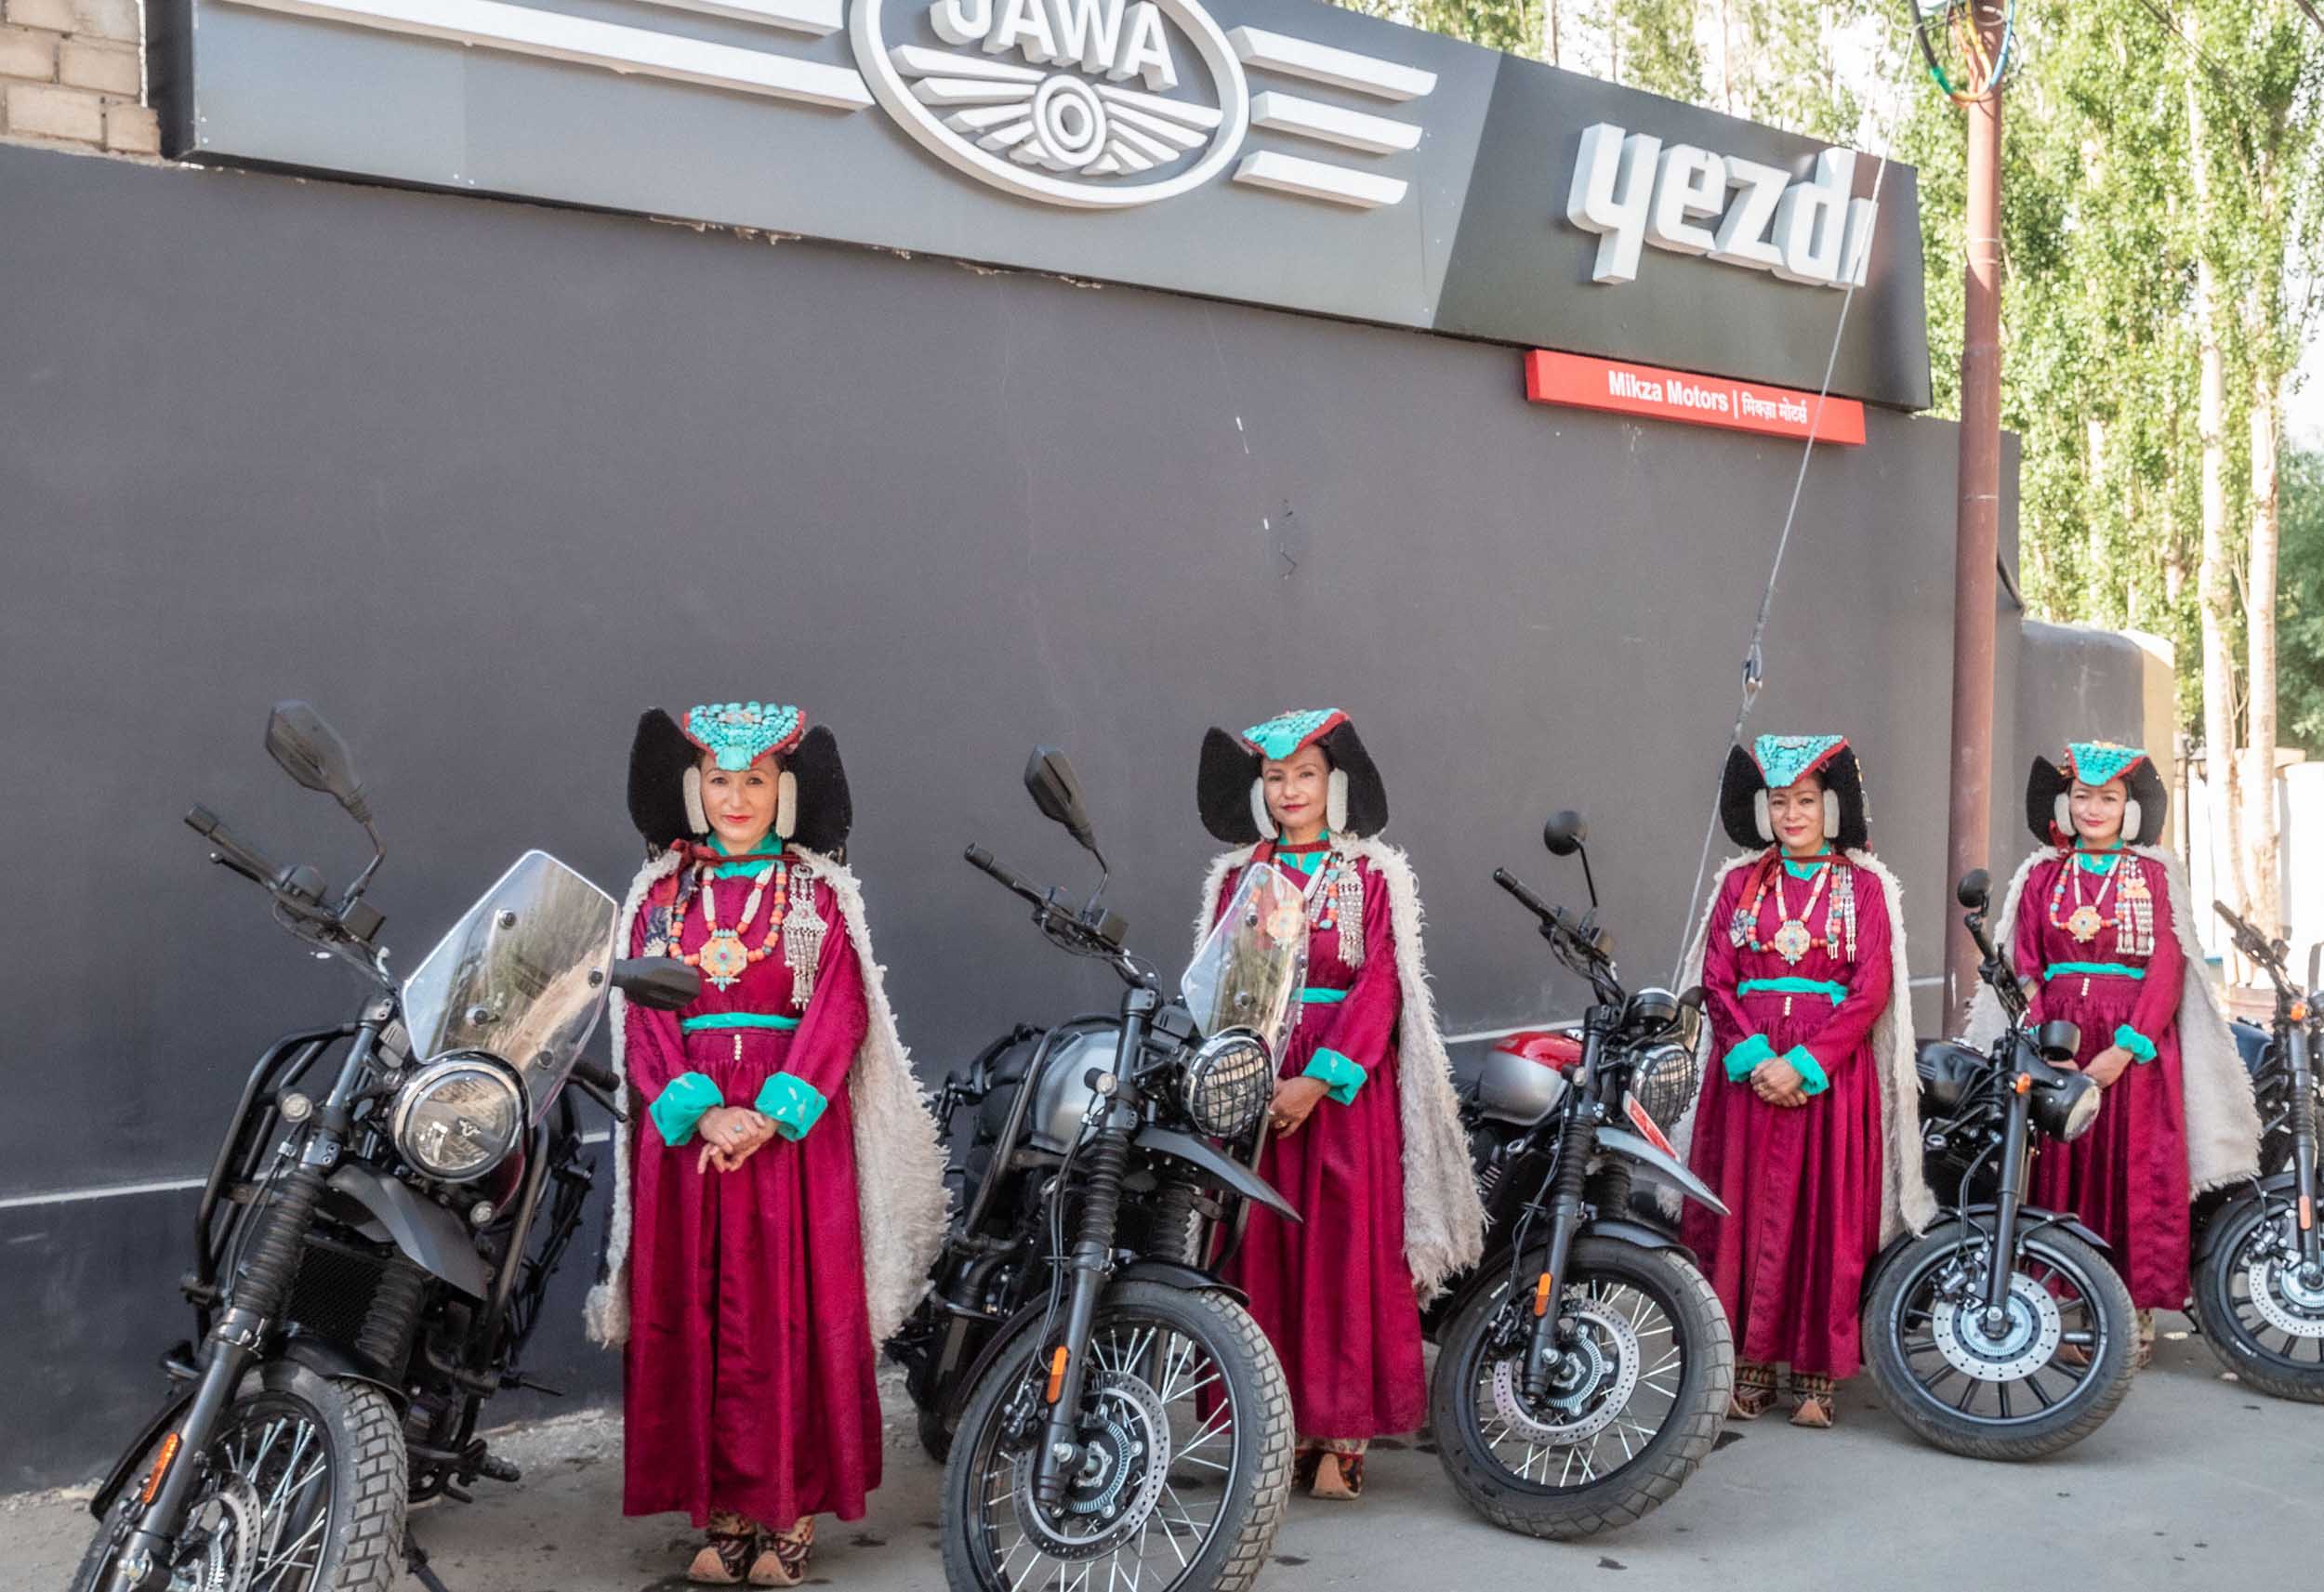 Java-Yazdi Motorcycles Announces 'Service Is On Us' Initiative on Ladakh Route